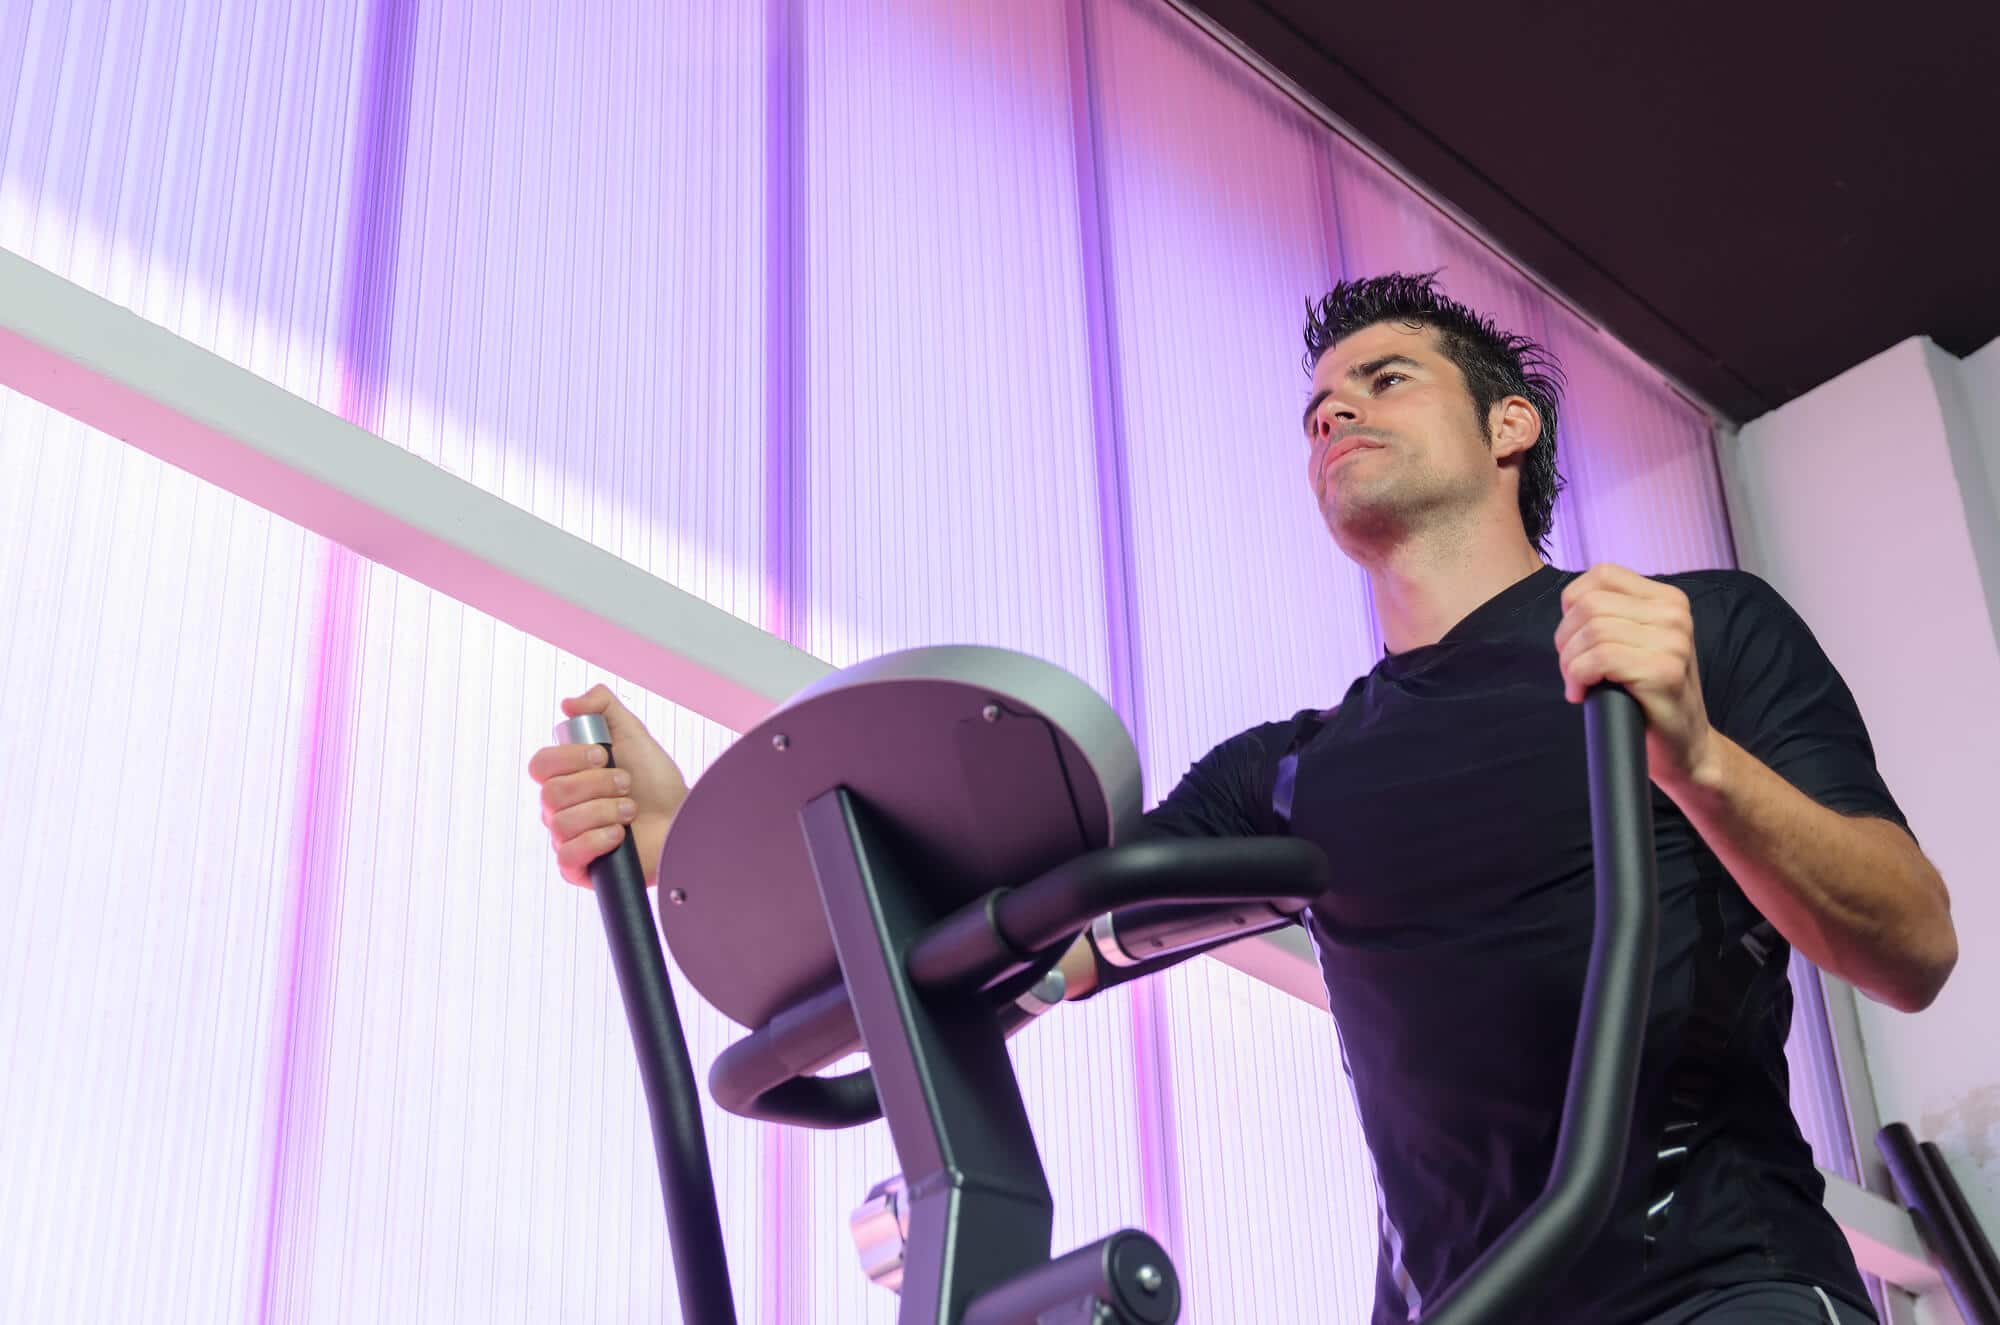 How To Properly Use An Elliptical | Fitness Expo